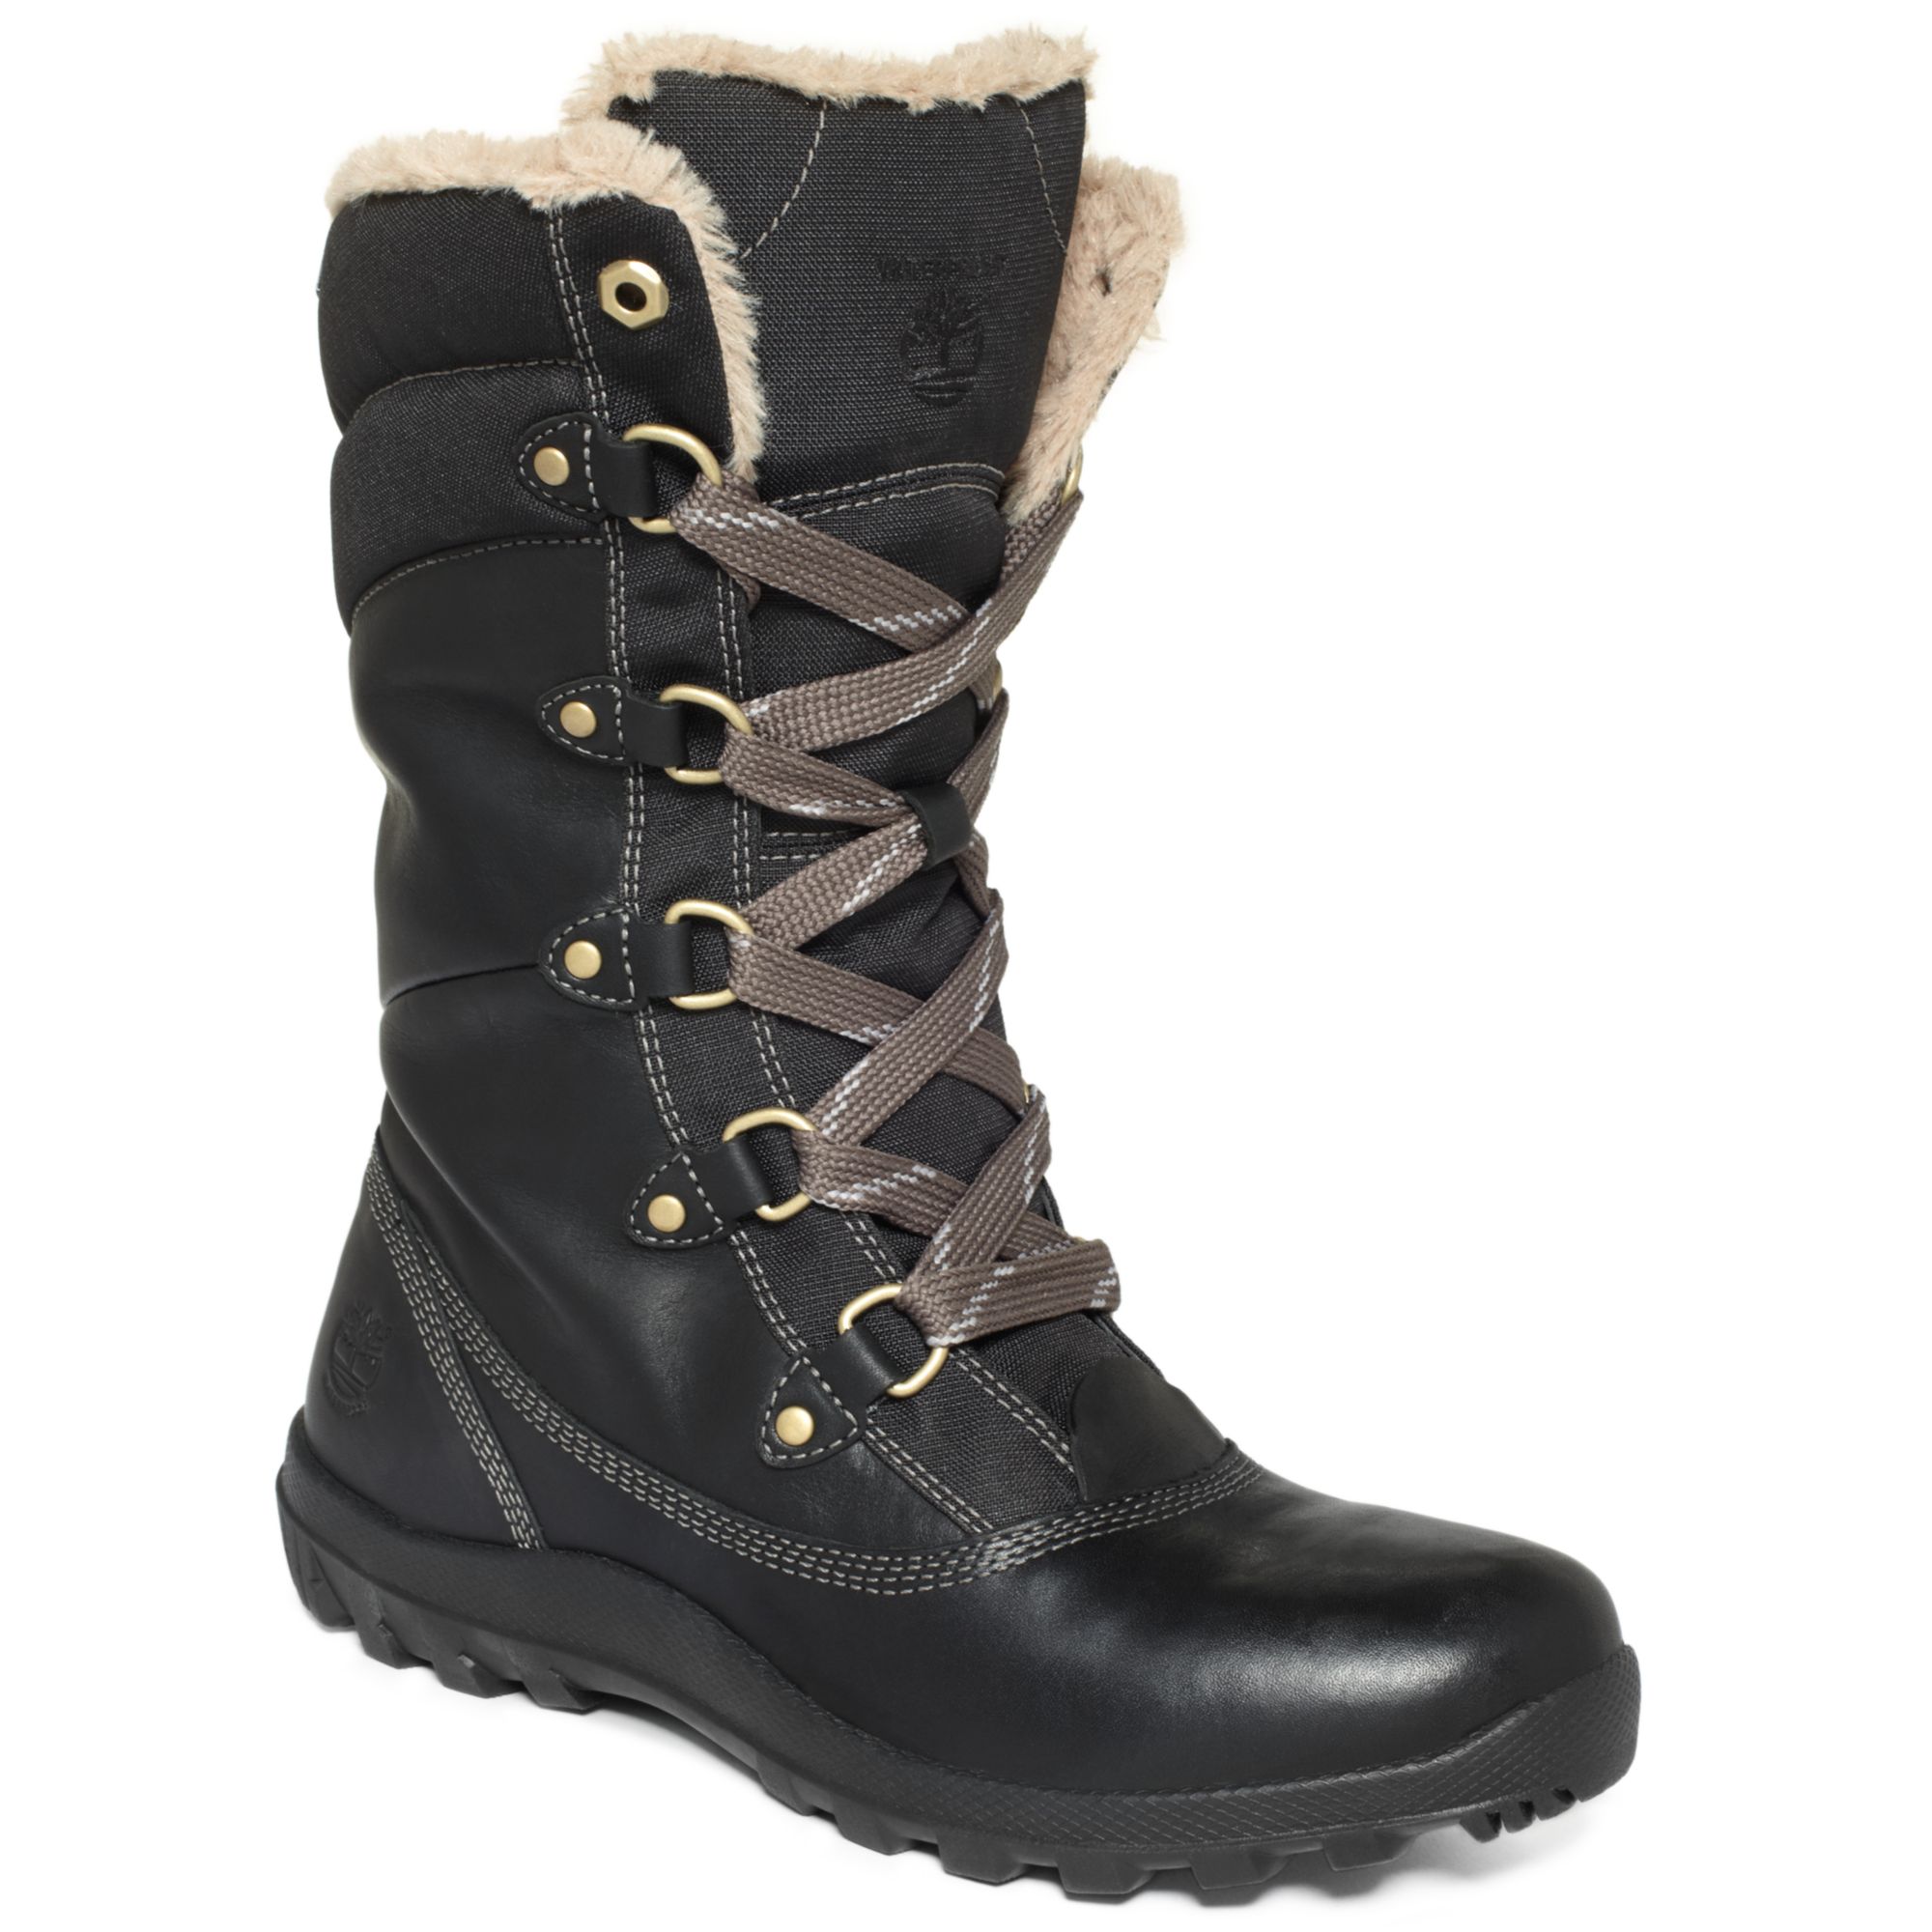 Timberland Men Winter Boots | Division of Global Affairs